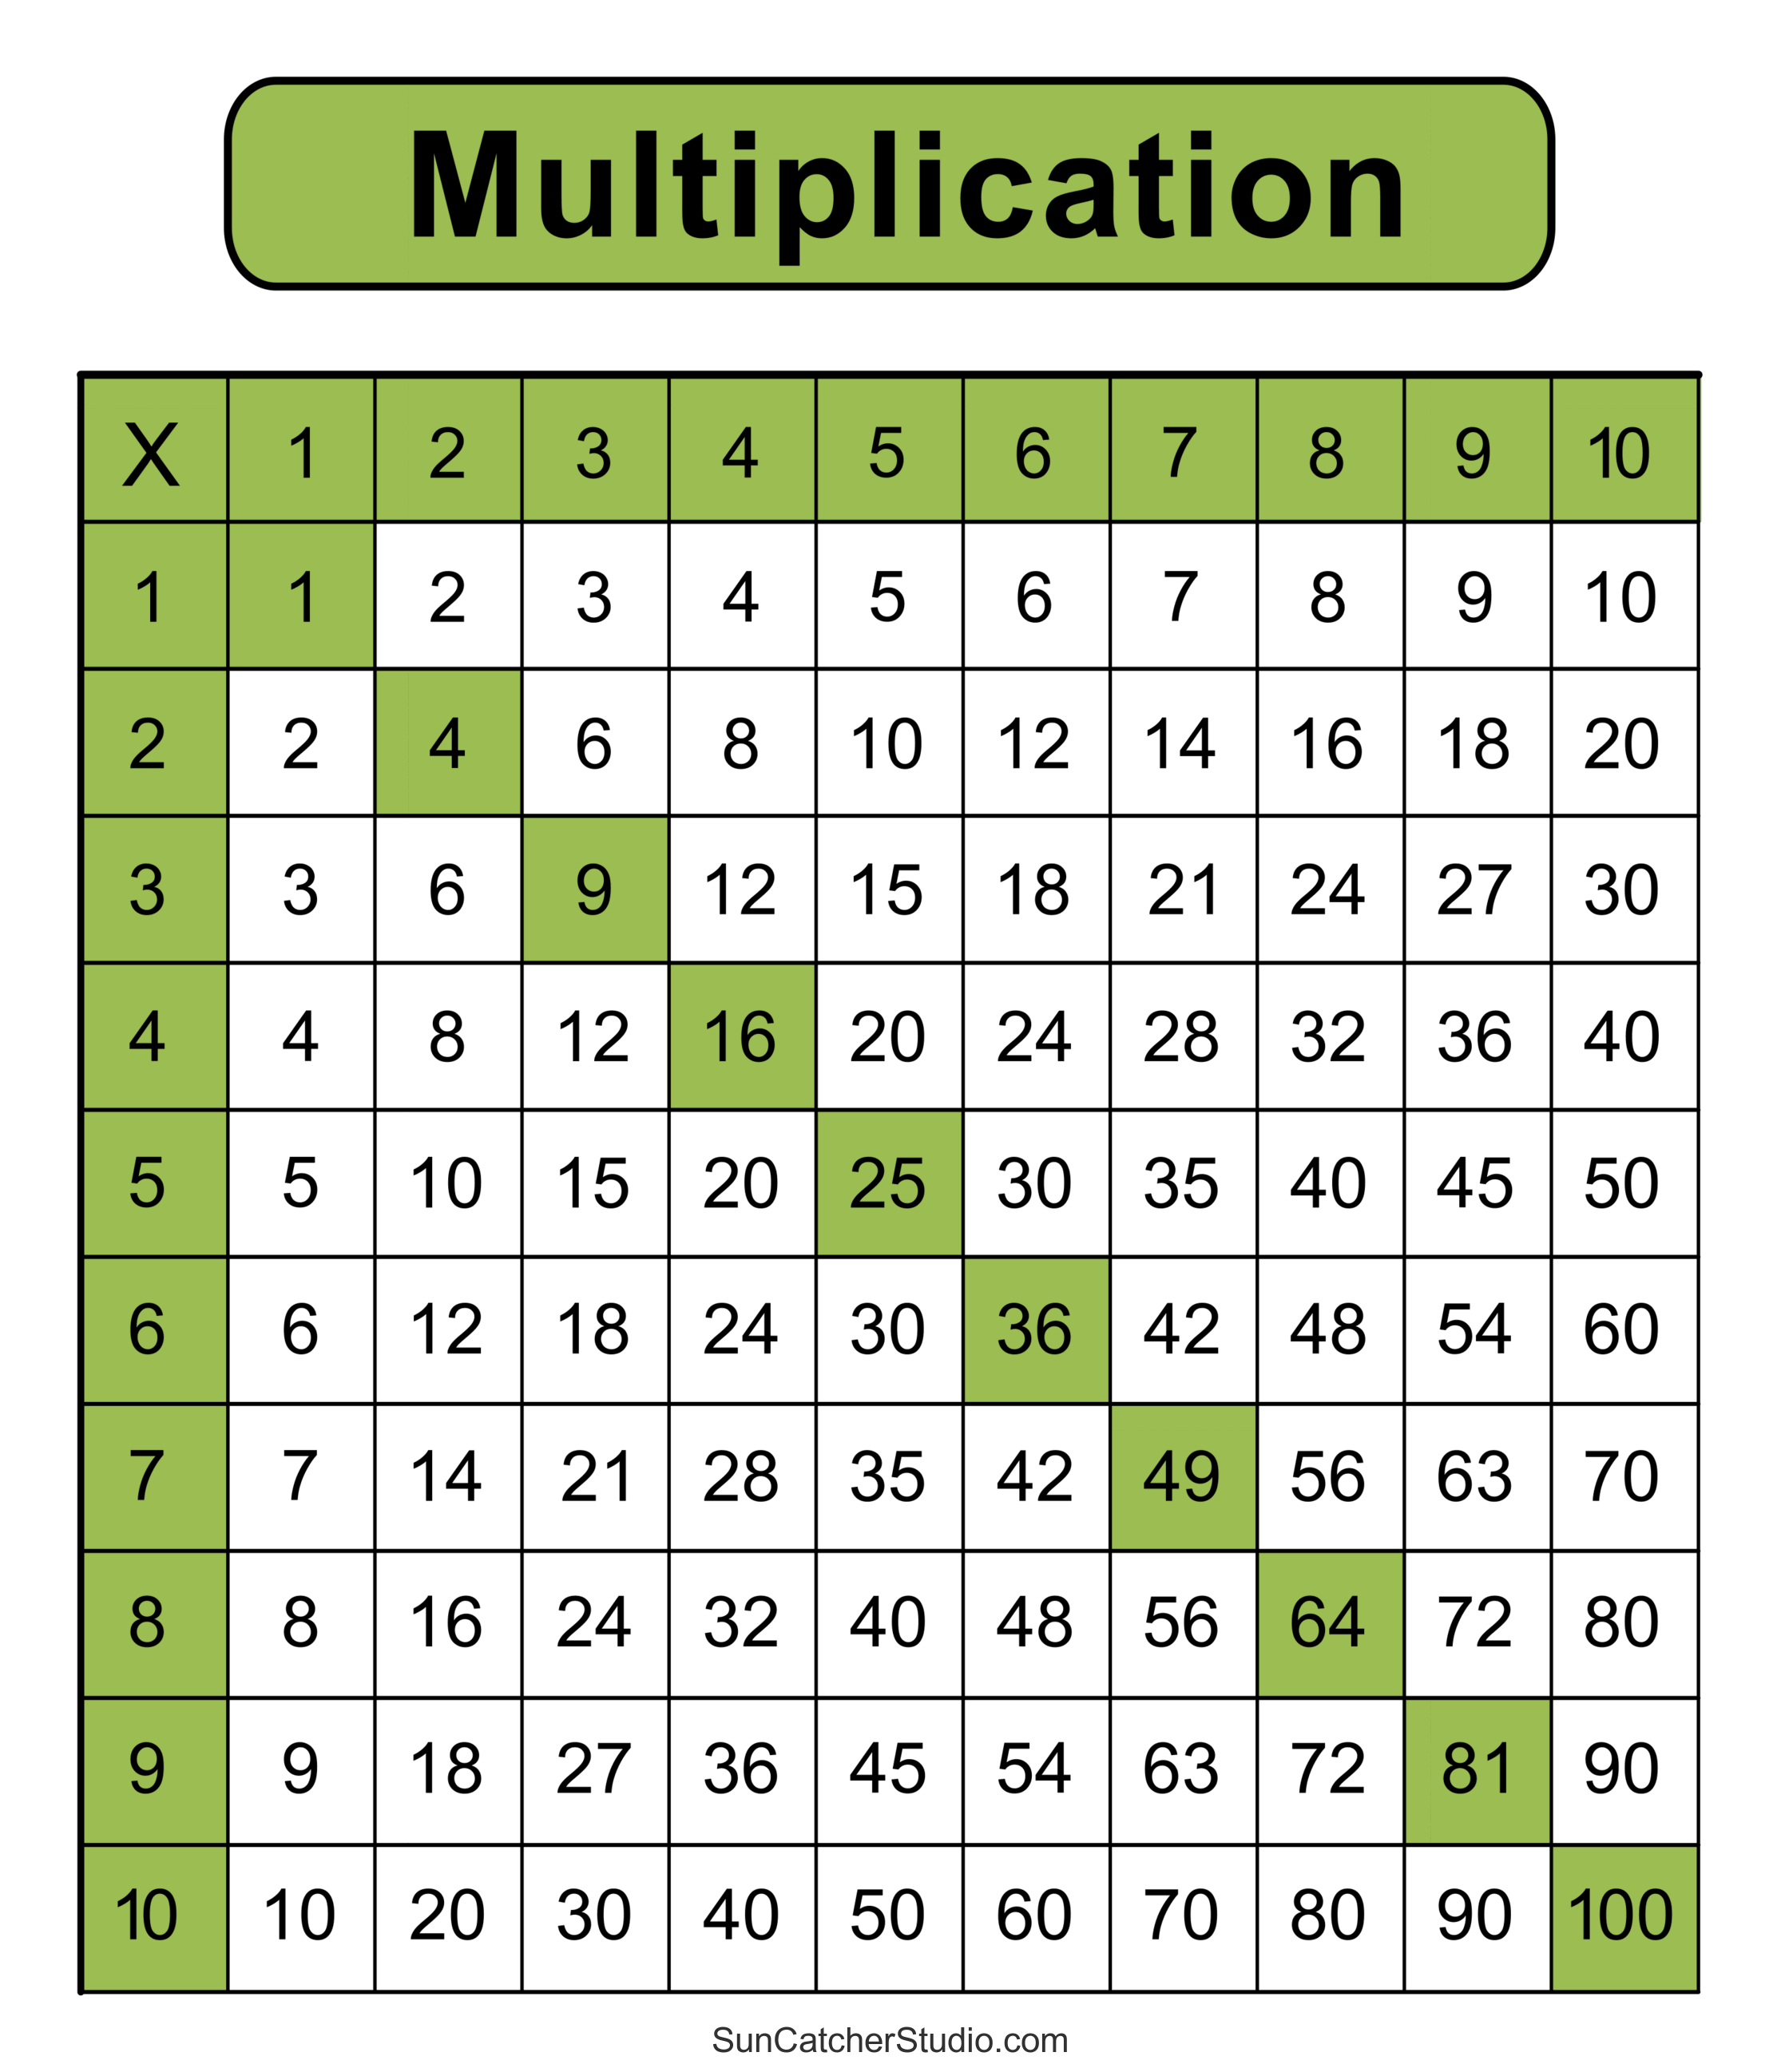 Multiplication Charts (Pdf): Free Printable Times Tables – Diy throughout Free Printable Math Multiplication Charts